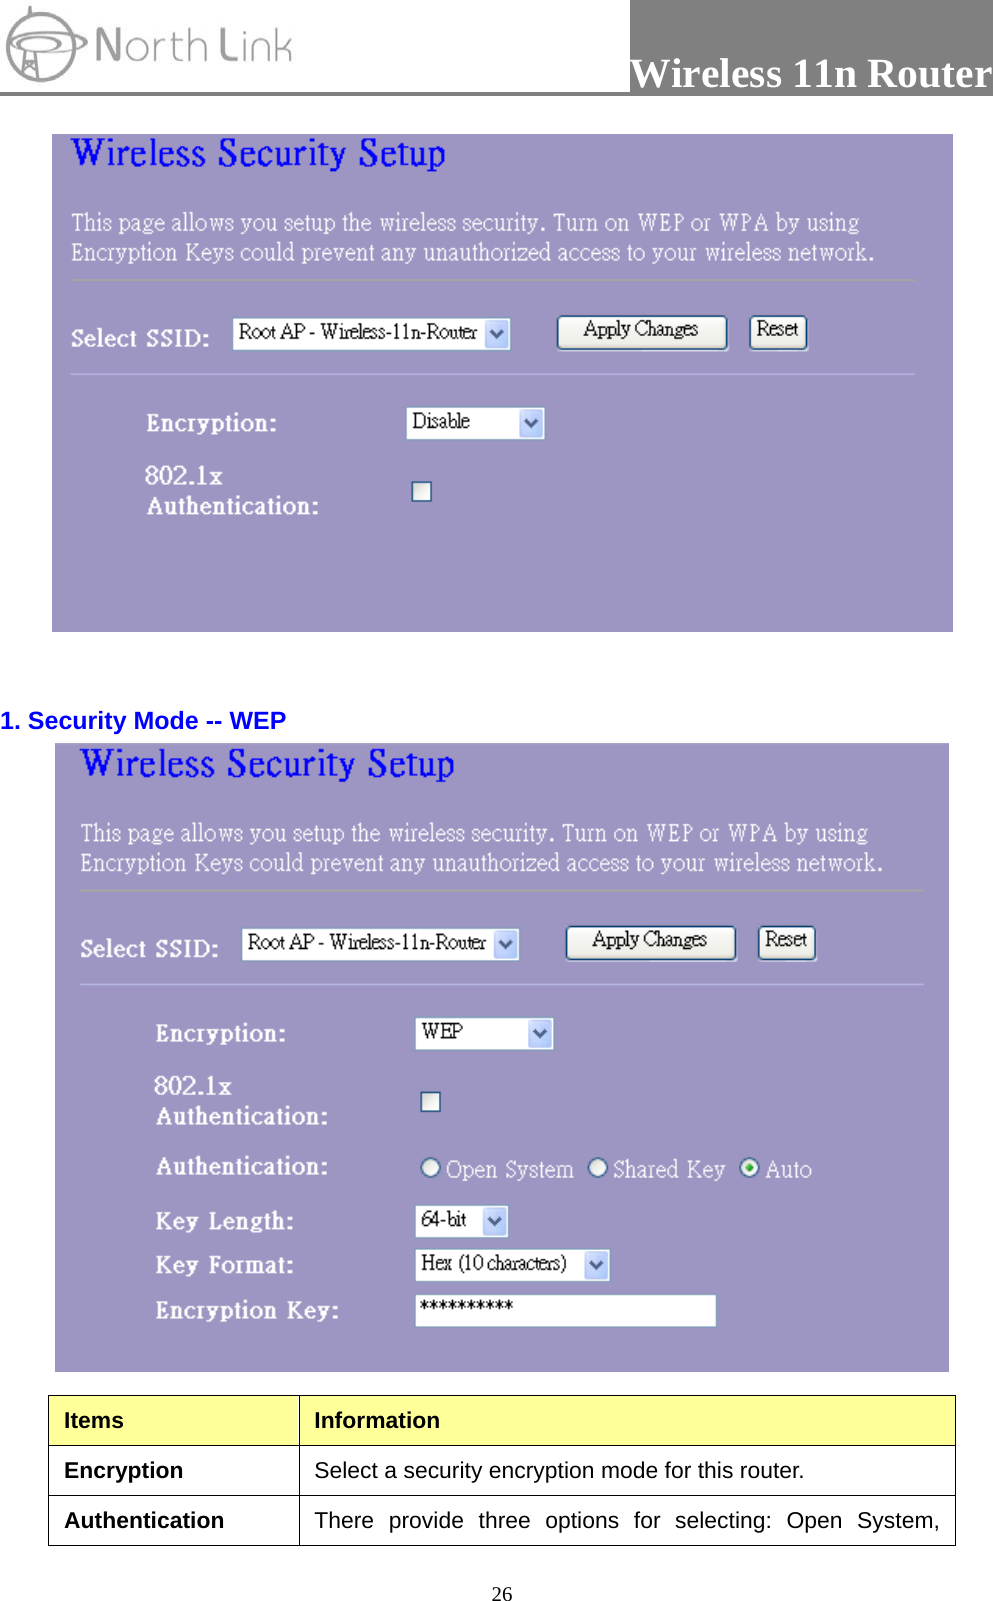                 Wireless 11n Router   26  1. Security Mode -- WEP  Items  Information Encryption  Select a security encryption mode for this router.   Authentication  There provide three options for selecting: Open System, 